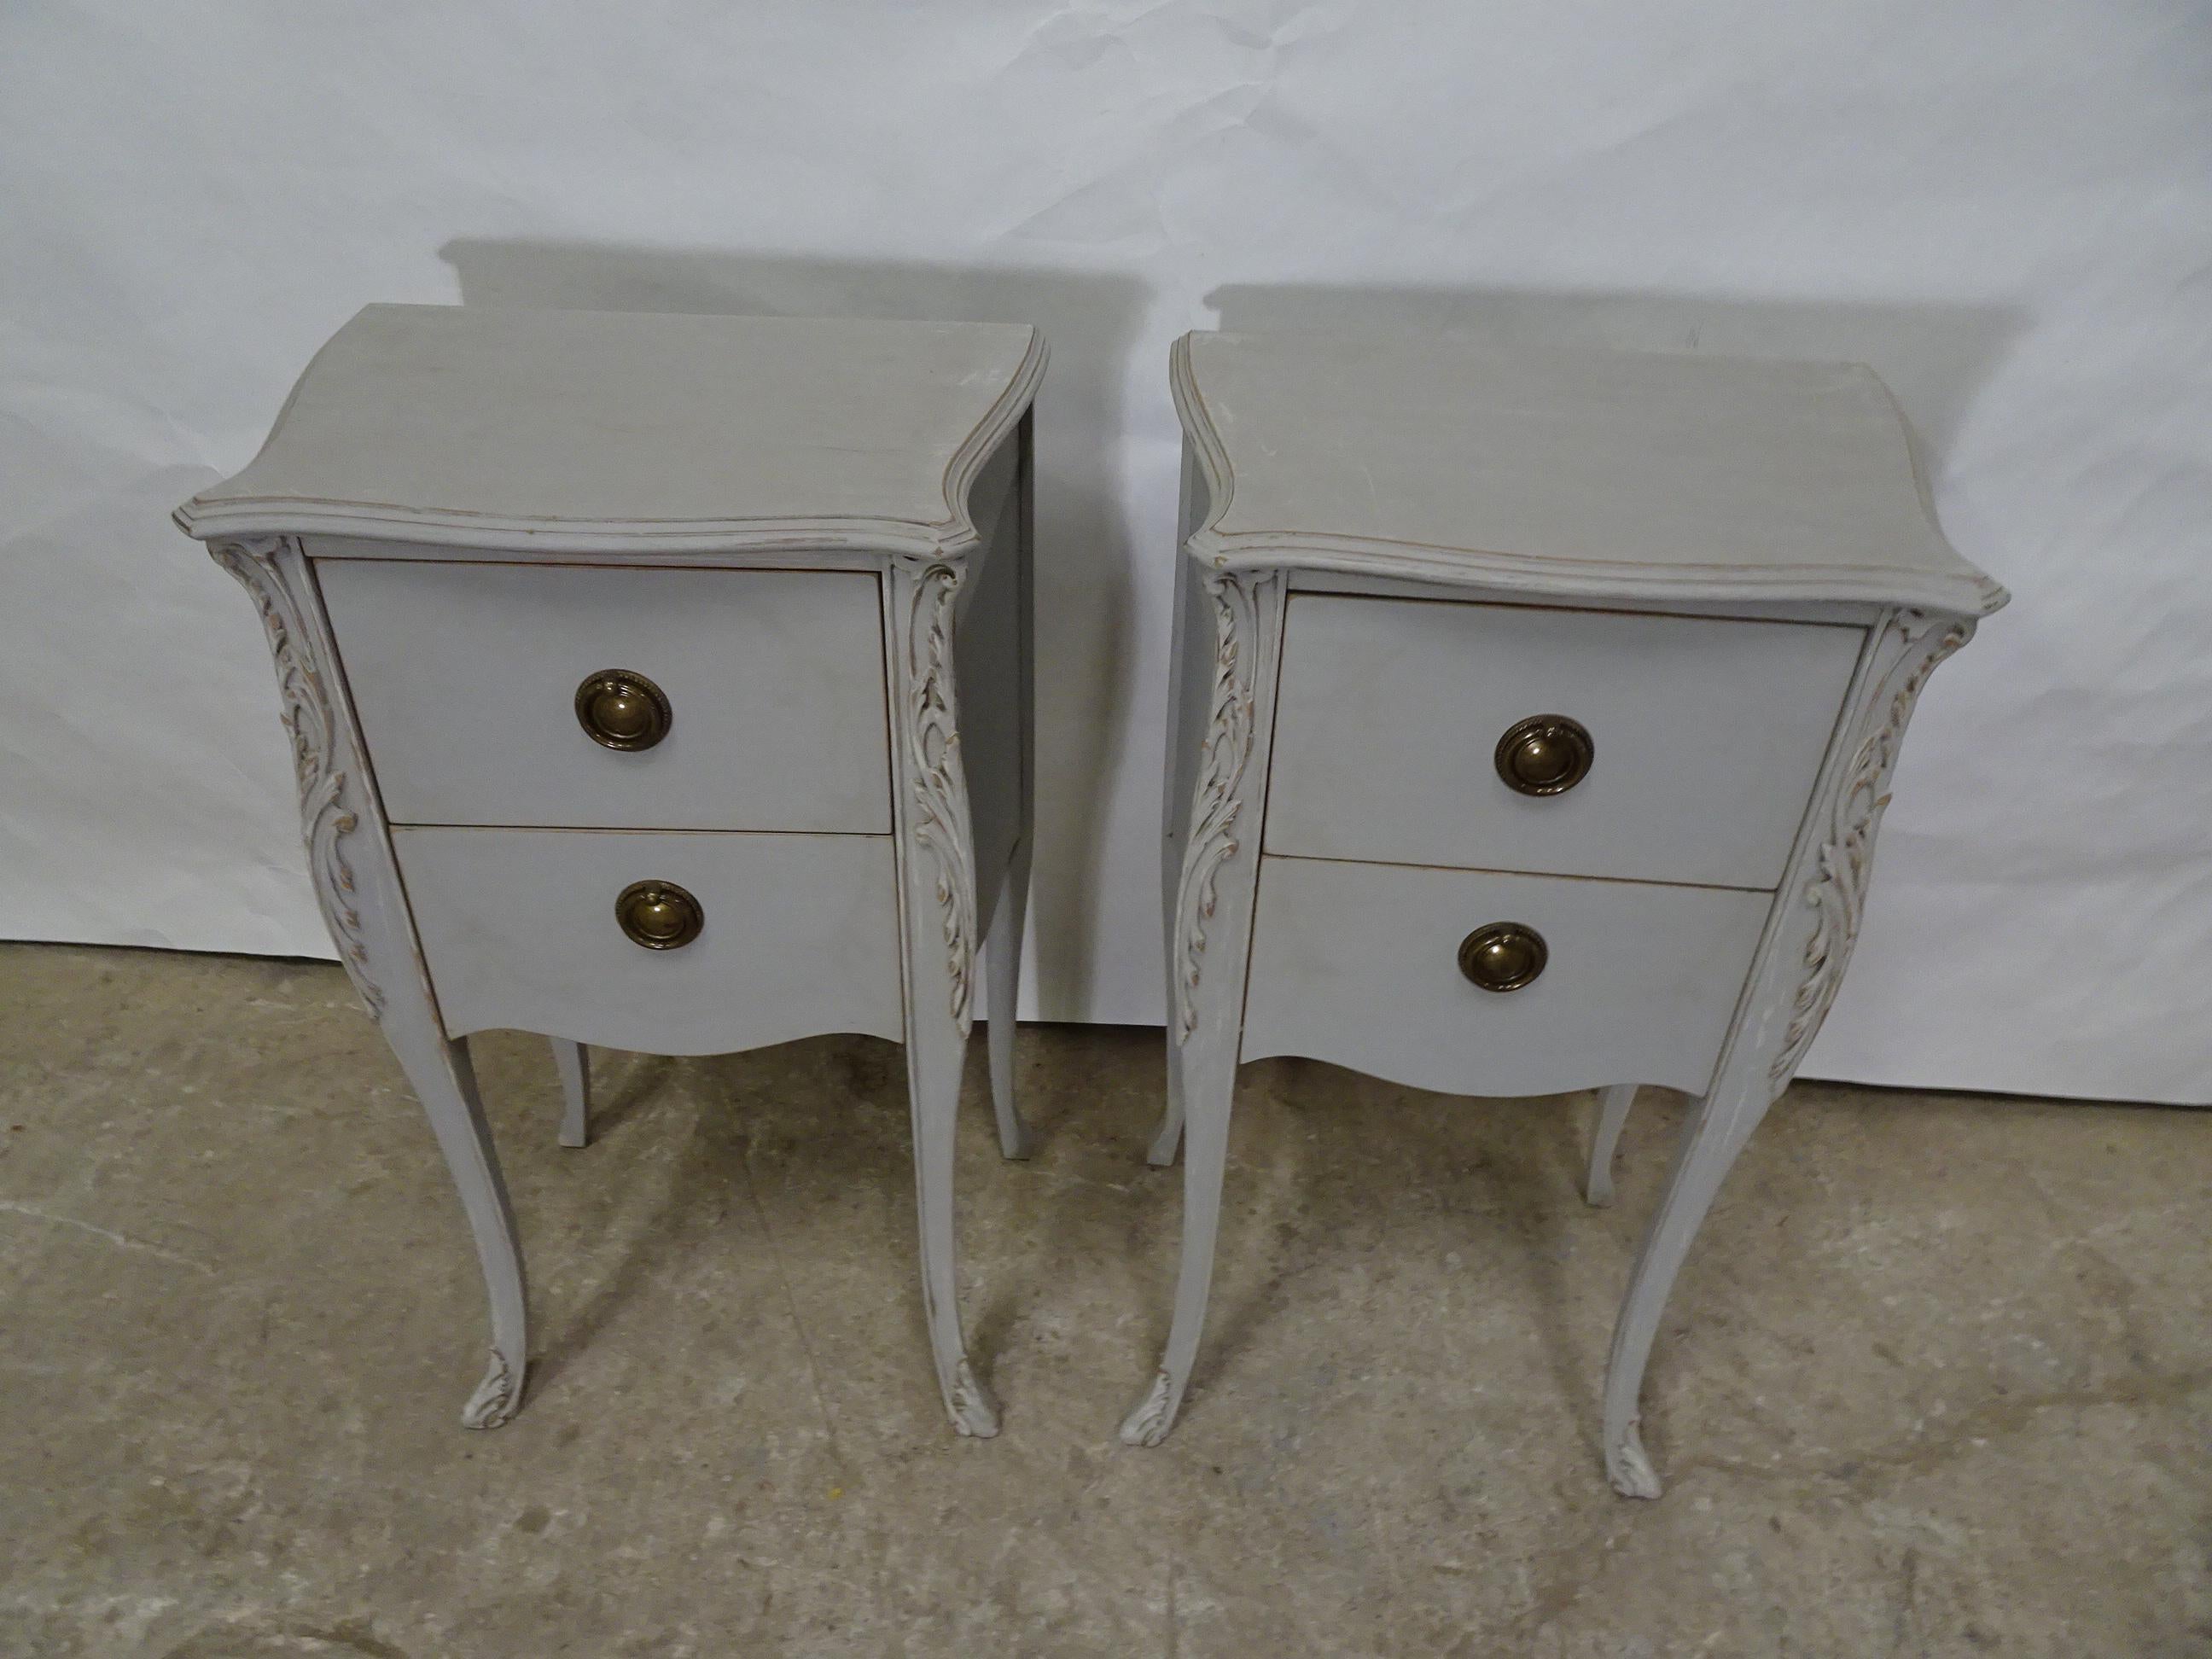 This is a set of 2 Rococo style nightstands, they have been restored and repainted with milk paints 